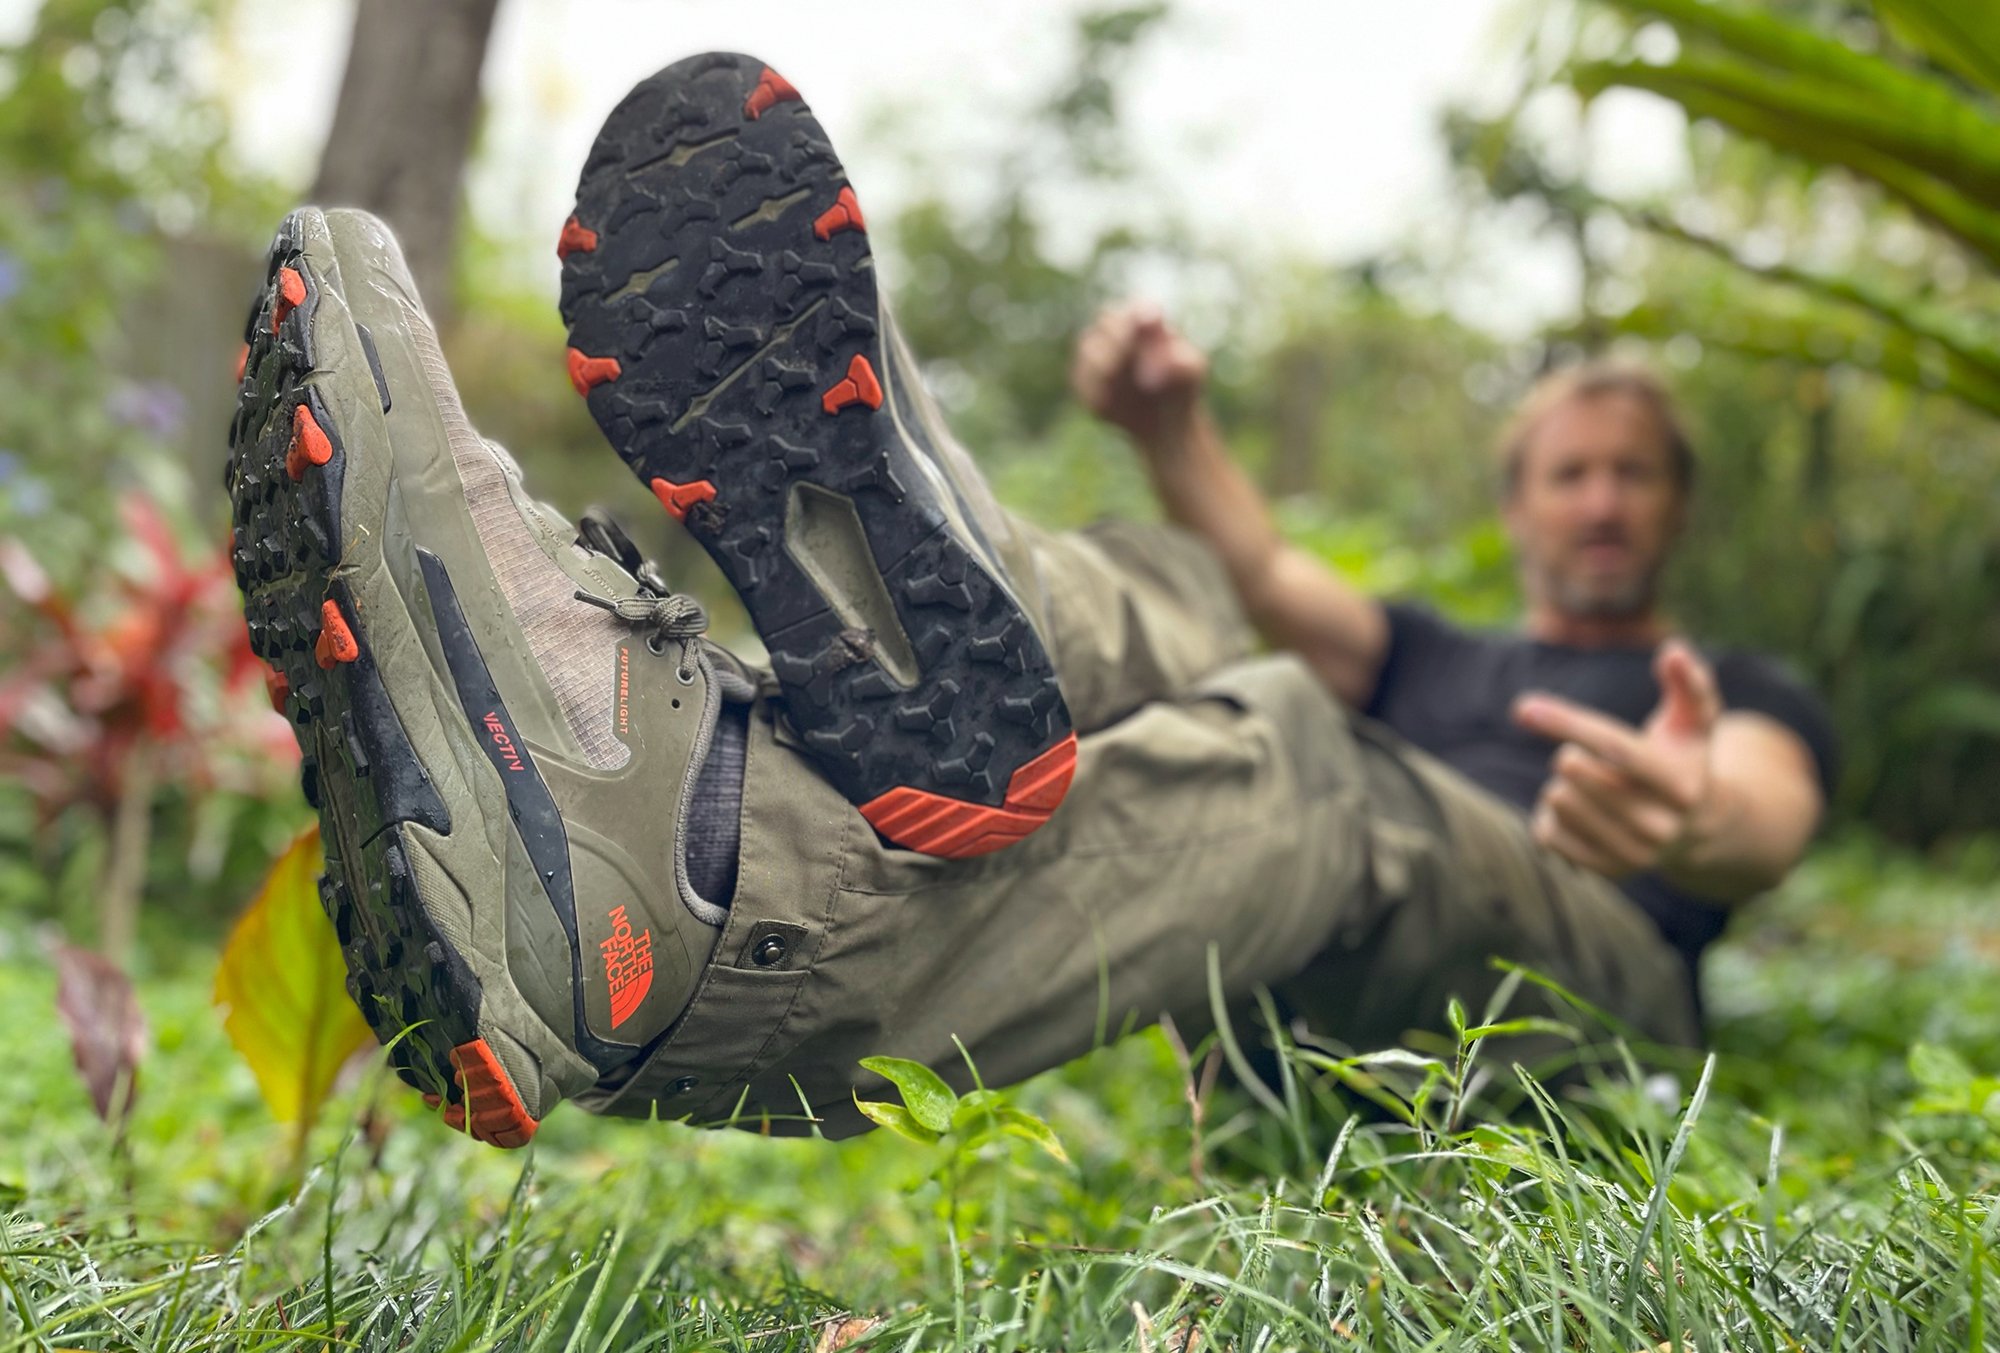 Video: The North Face VECTIV Exploris hiking shoe tested